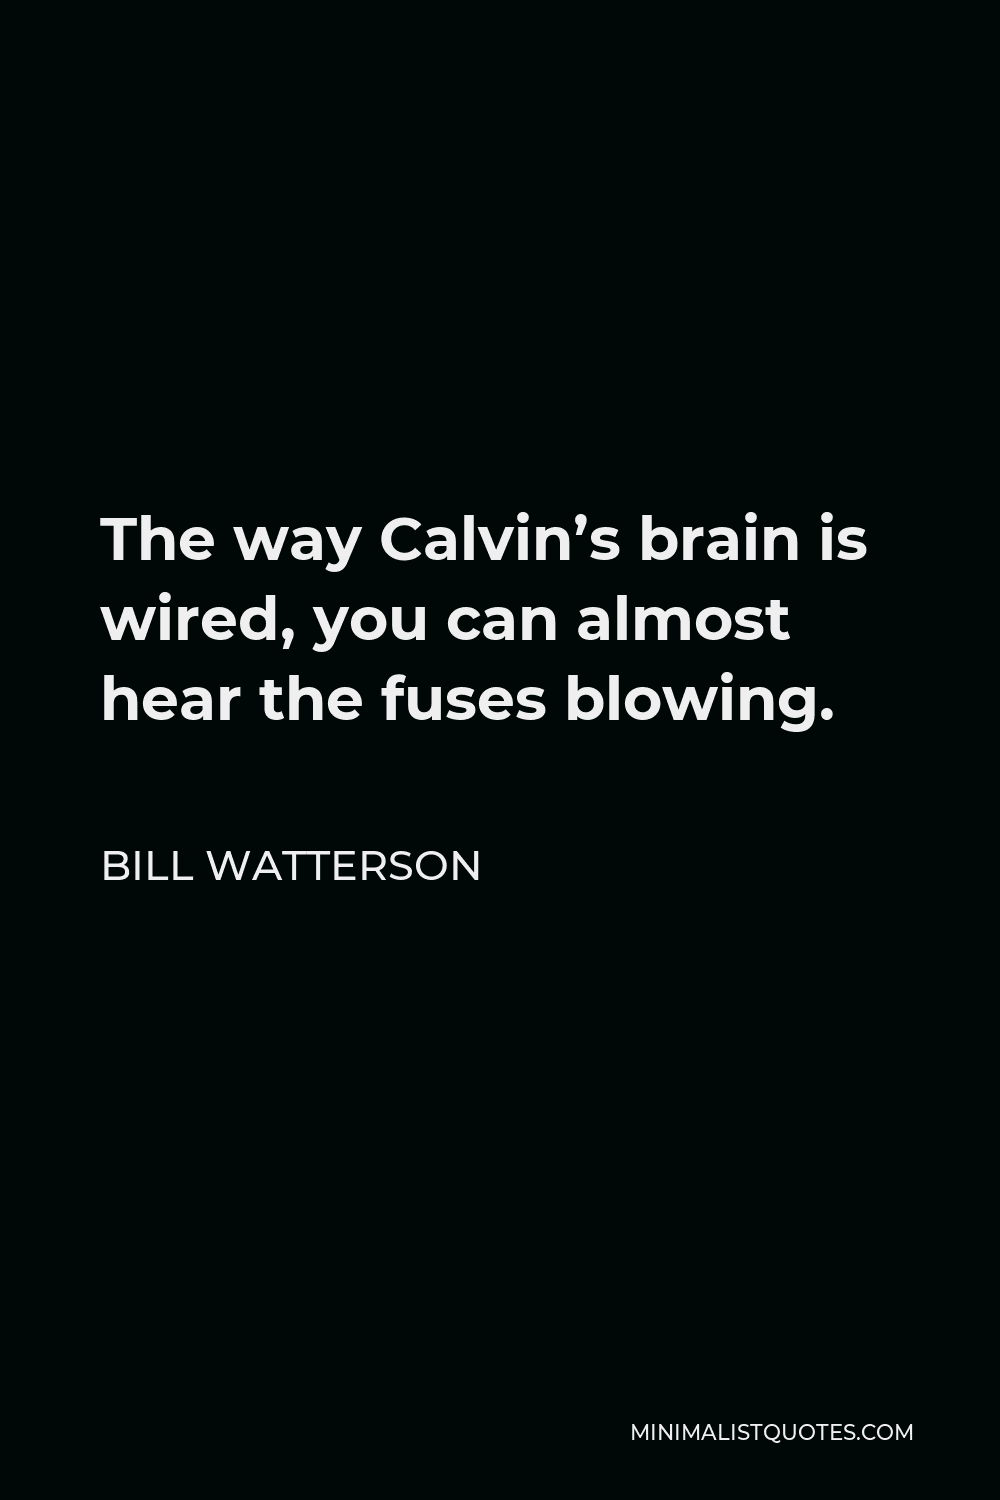 Bill Watterson Quote - The way Calvin’s brain is wired, you can almost hear the fuses blowing.